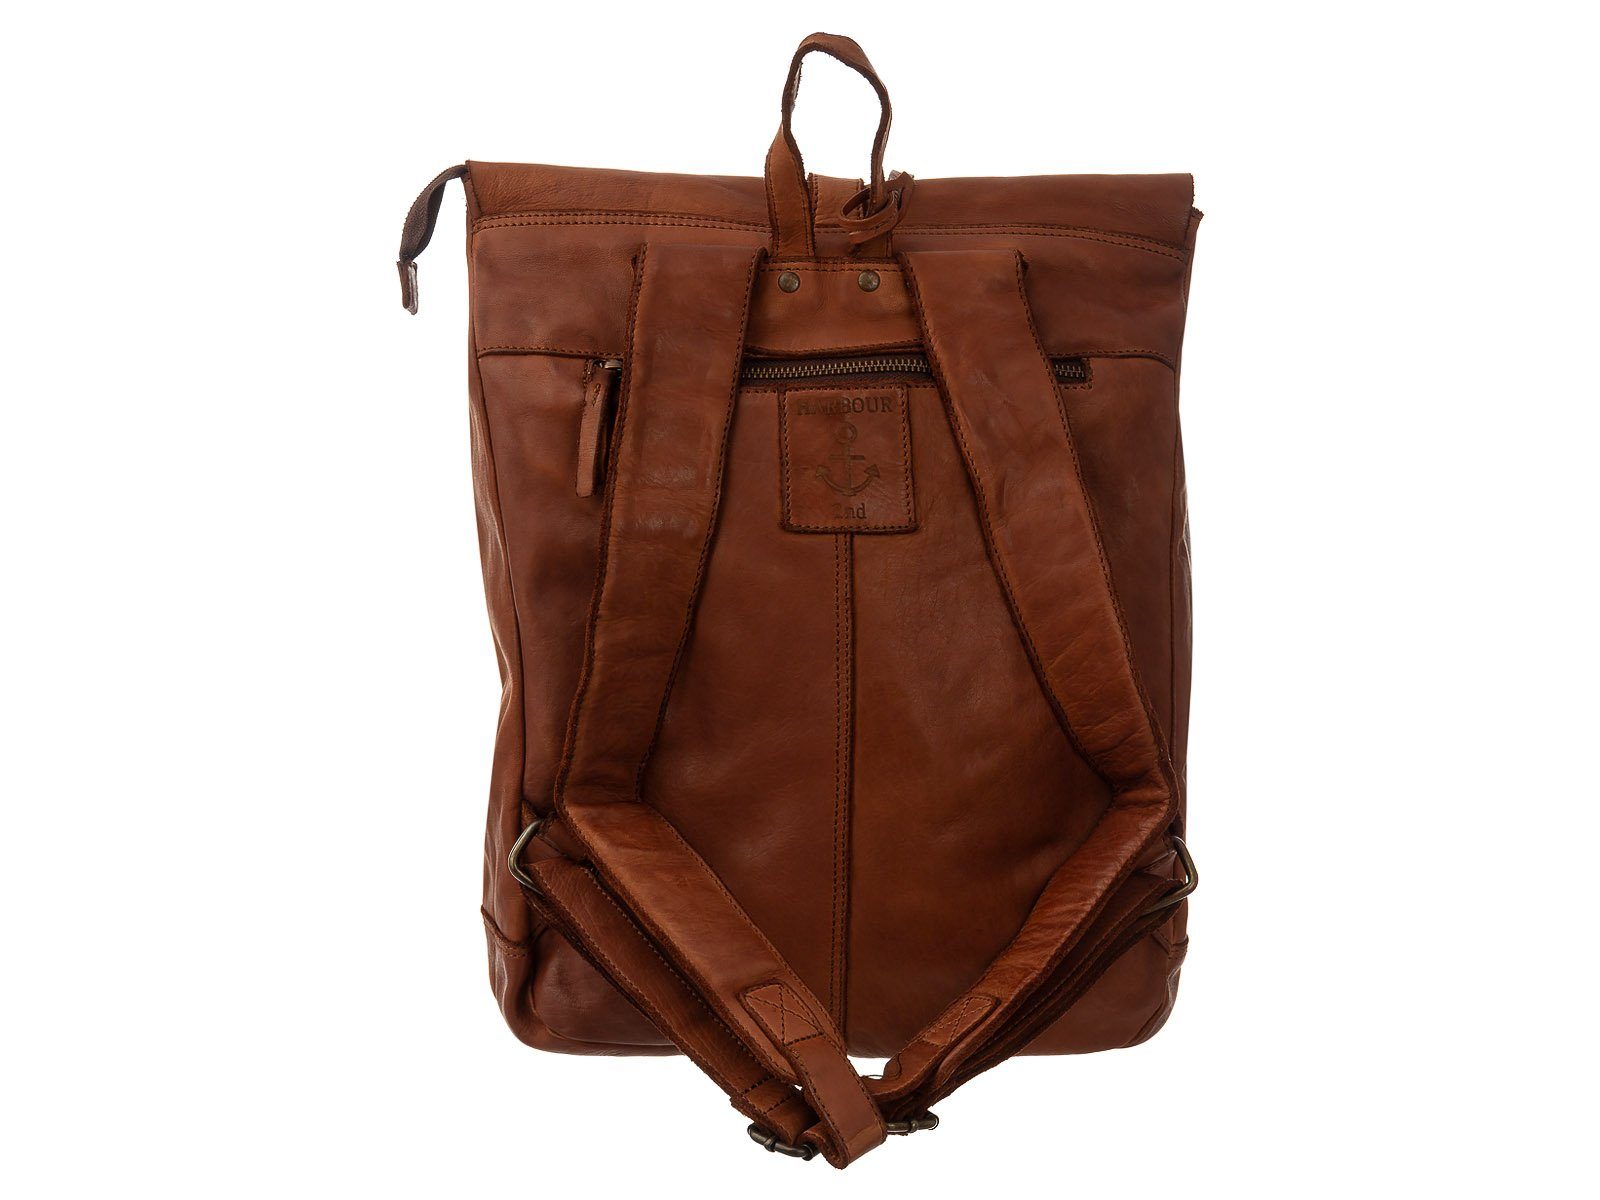 Cool HARBOUR Casual Ankeranhänger Backpack-Style Daypack 2nd Cognac Rucksack, Eagle